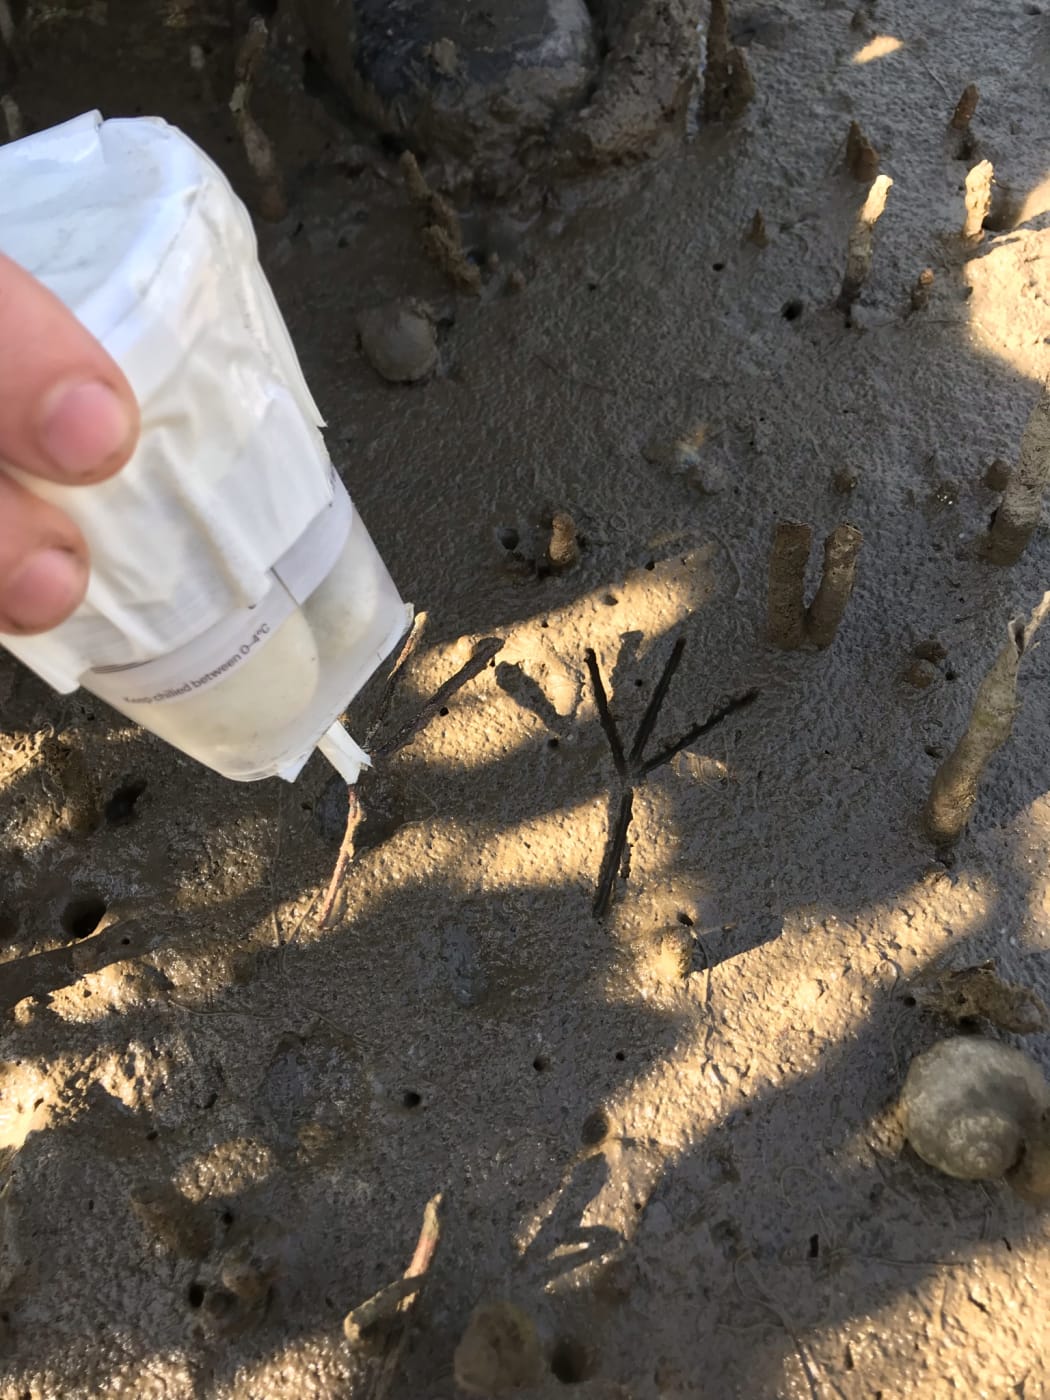 Testing mud for impressionability - a plastic box filled with stones weighing the same amount as a banded rail is used to test whether the mud is a good substrate for footprints.